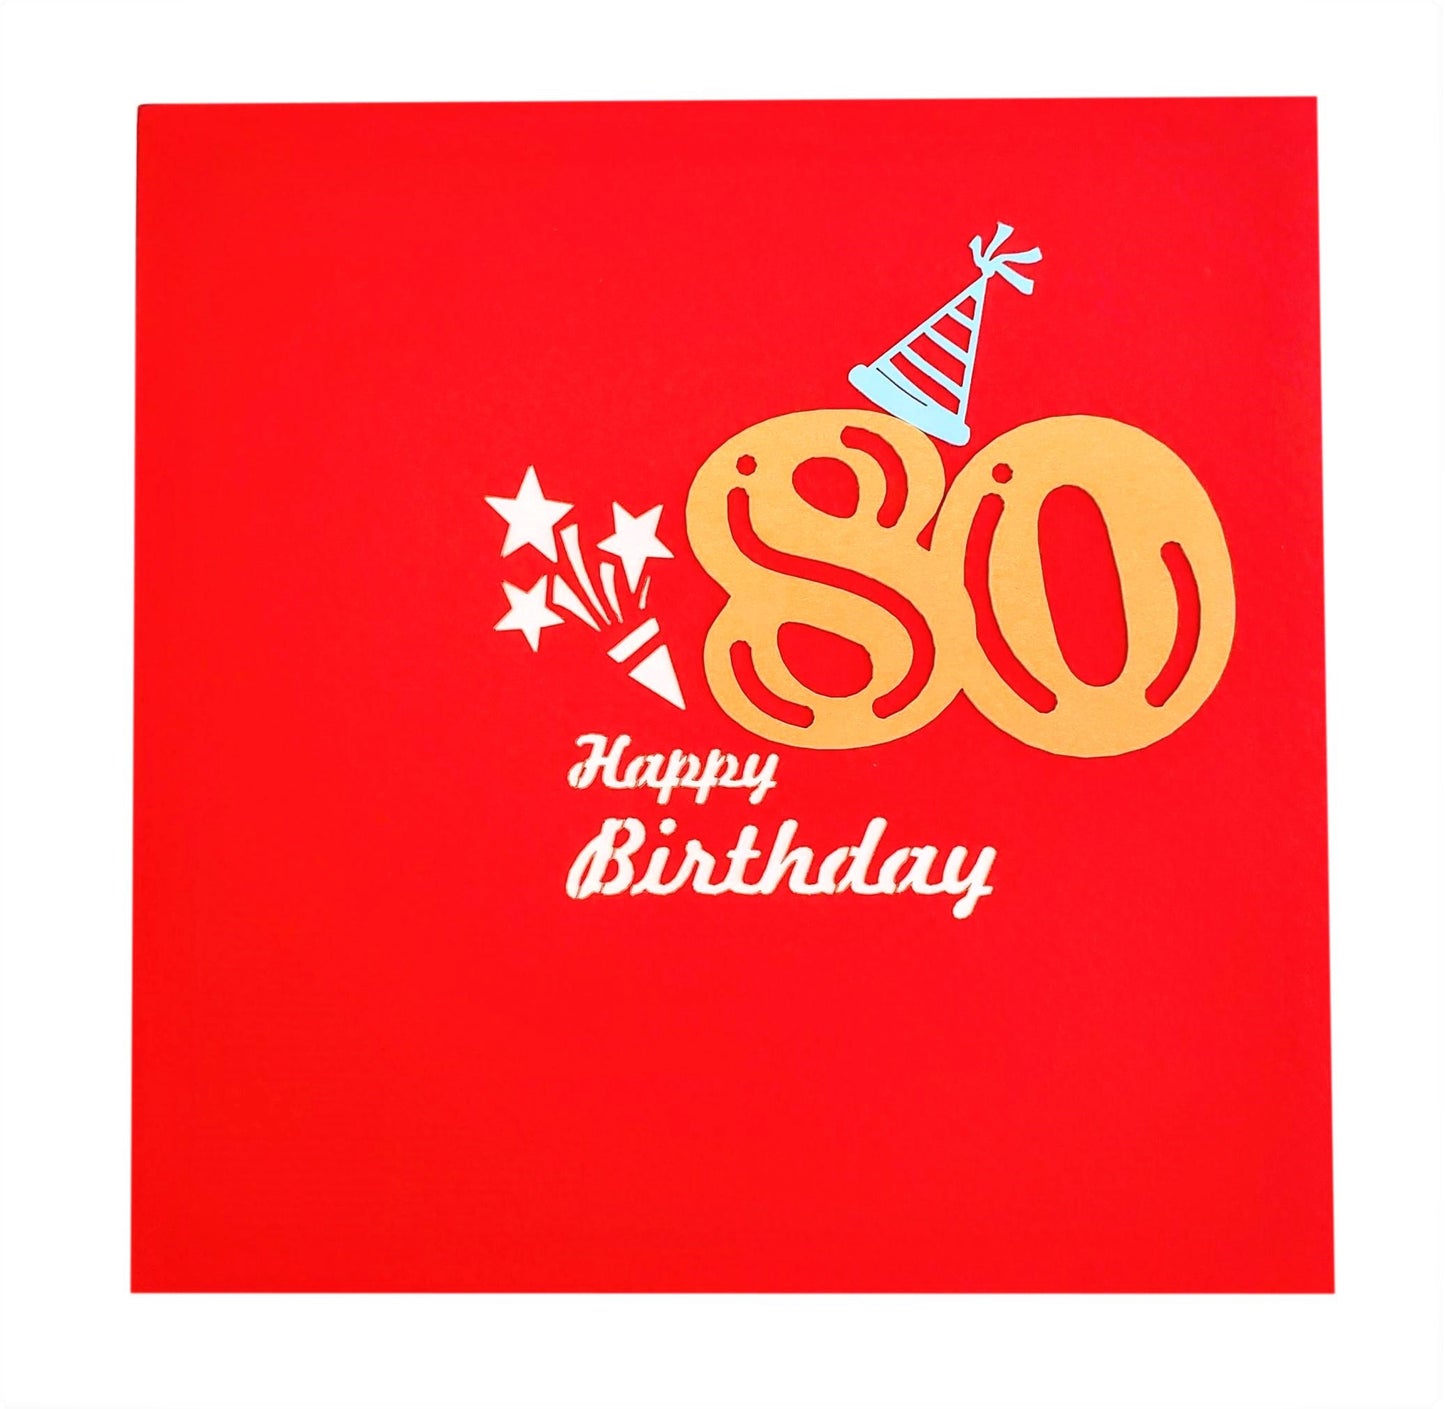 Happy 80th Birthday Red Party Box 3D Pop Up Greeting Card - Birthday - Fun - Milestone - Special Day - iGifts And Cards